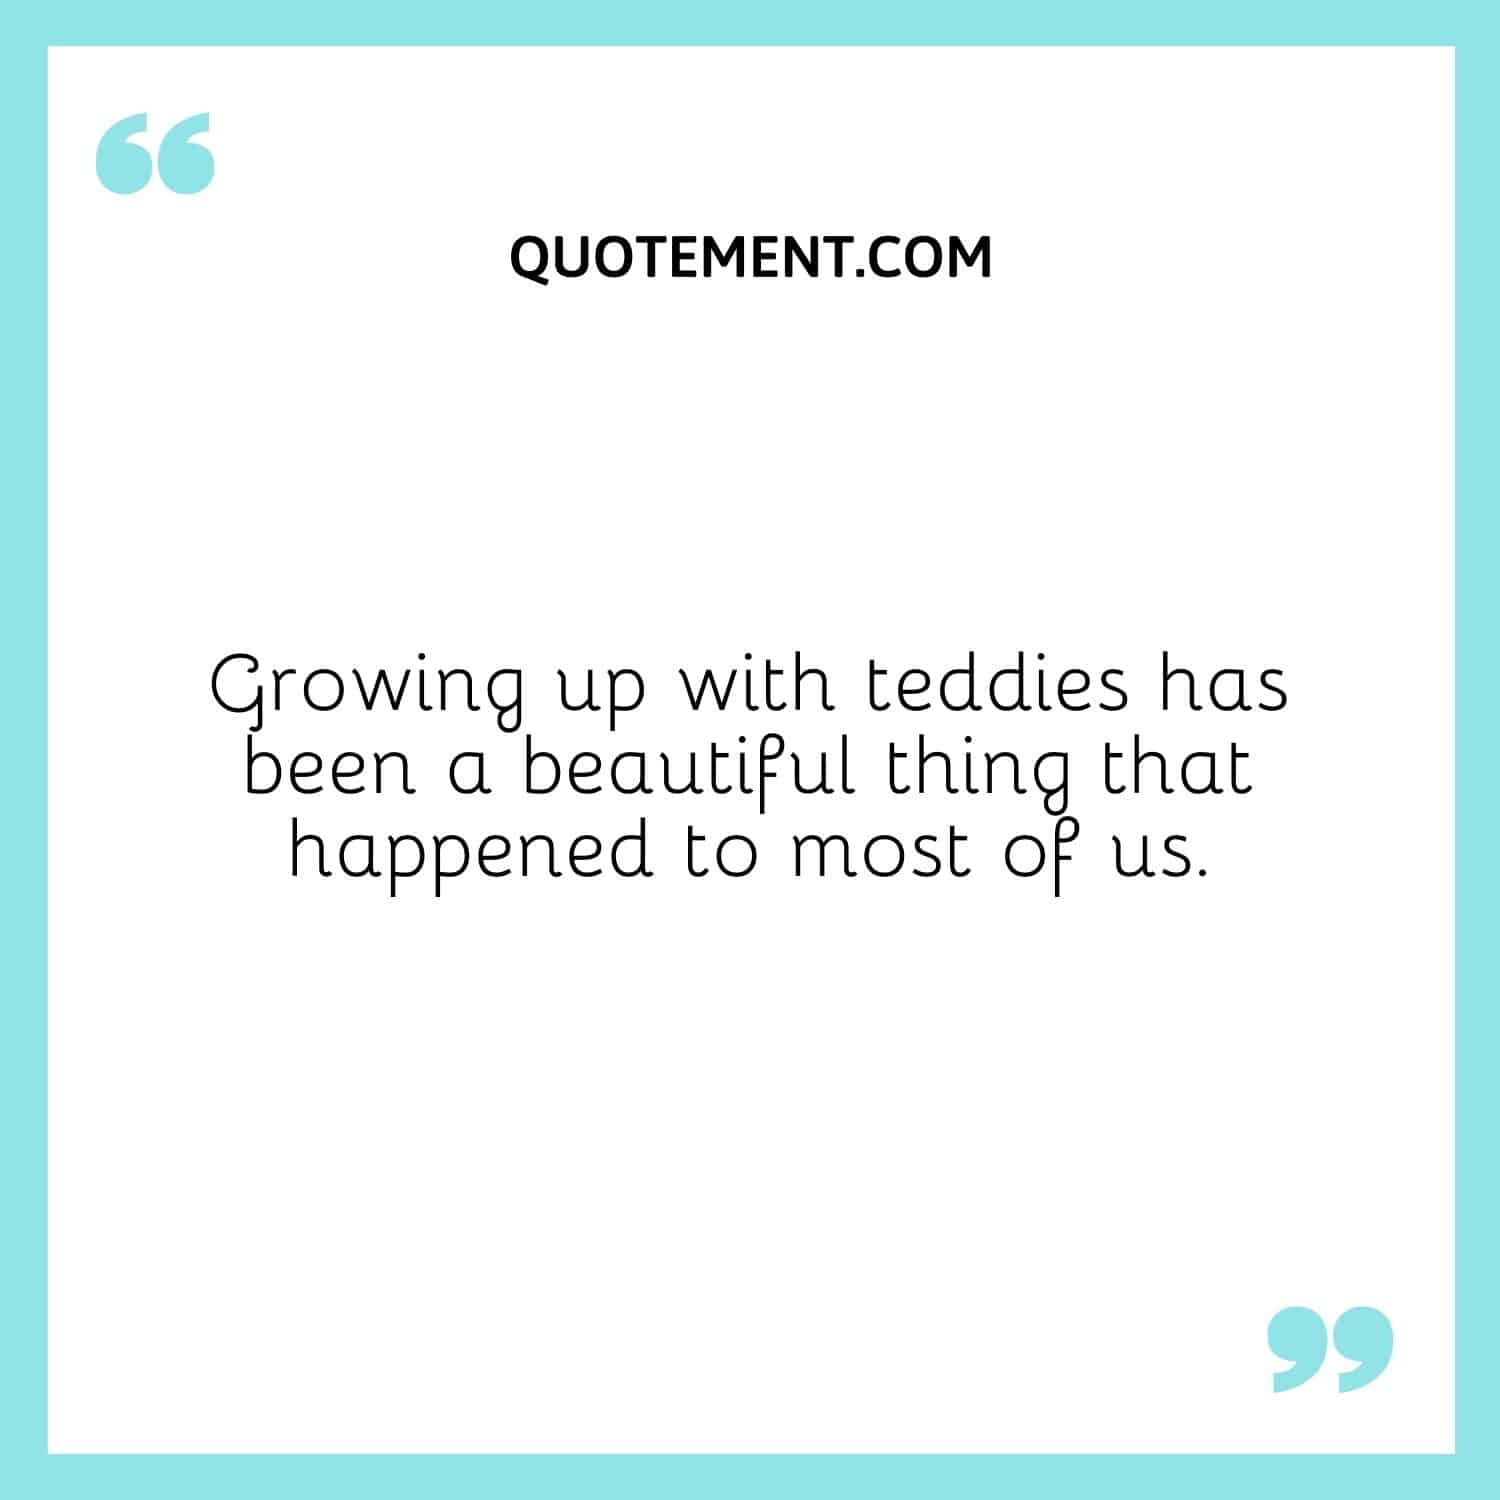 Growing up with teddies has been a beautiful thing that happened to most of us